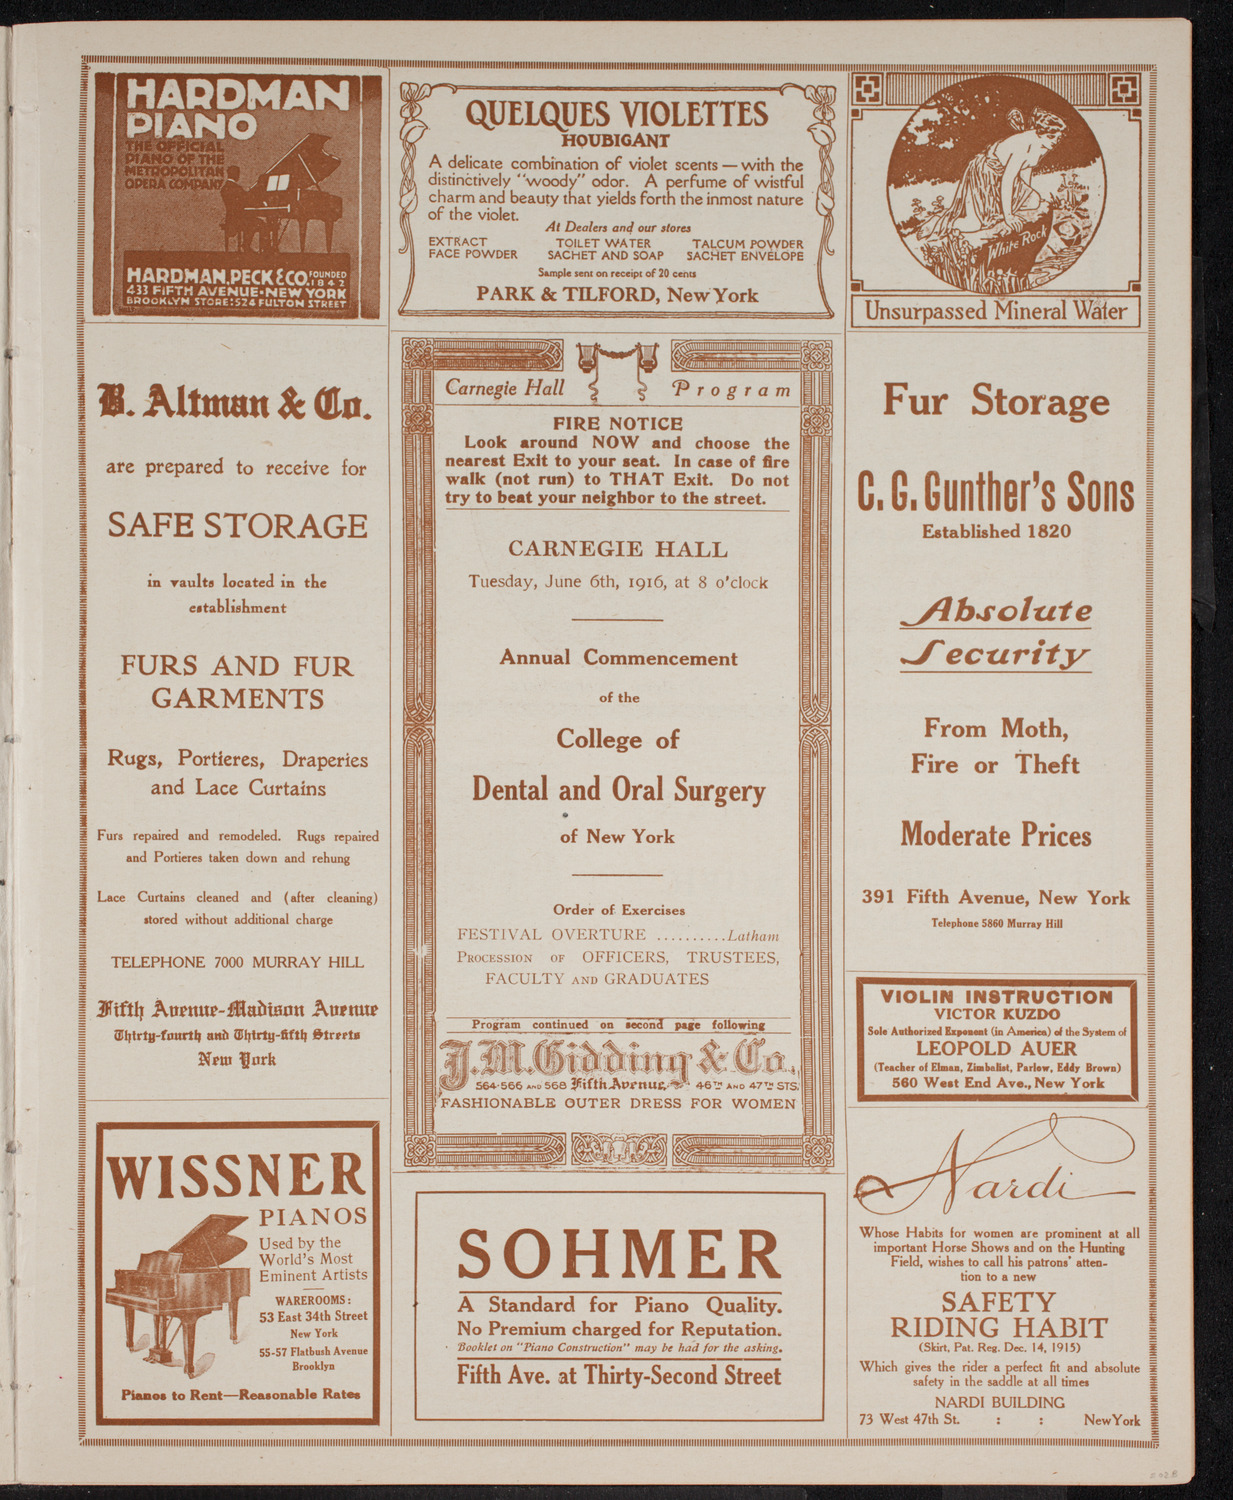 Graduation: College of Dental and Oral Surgery of New York, June 6, 1916, program page 5